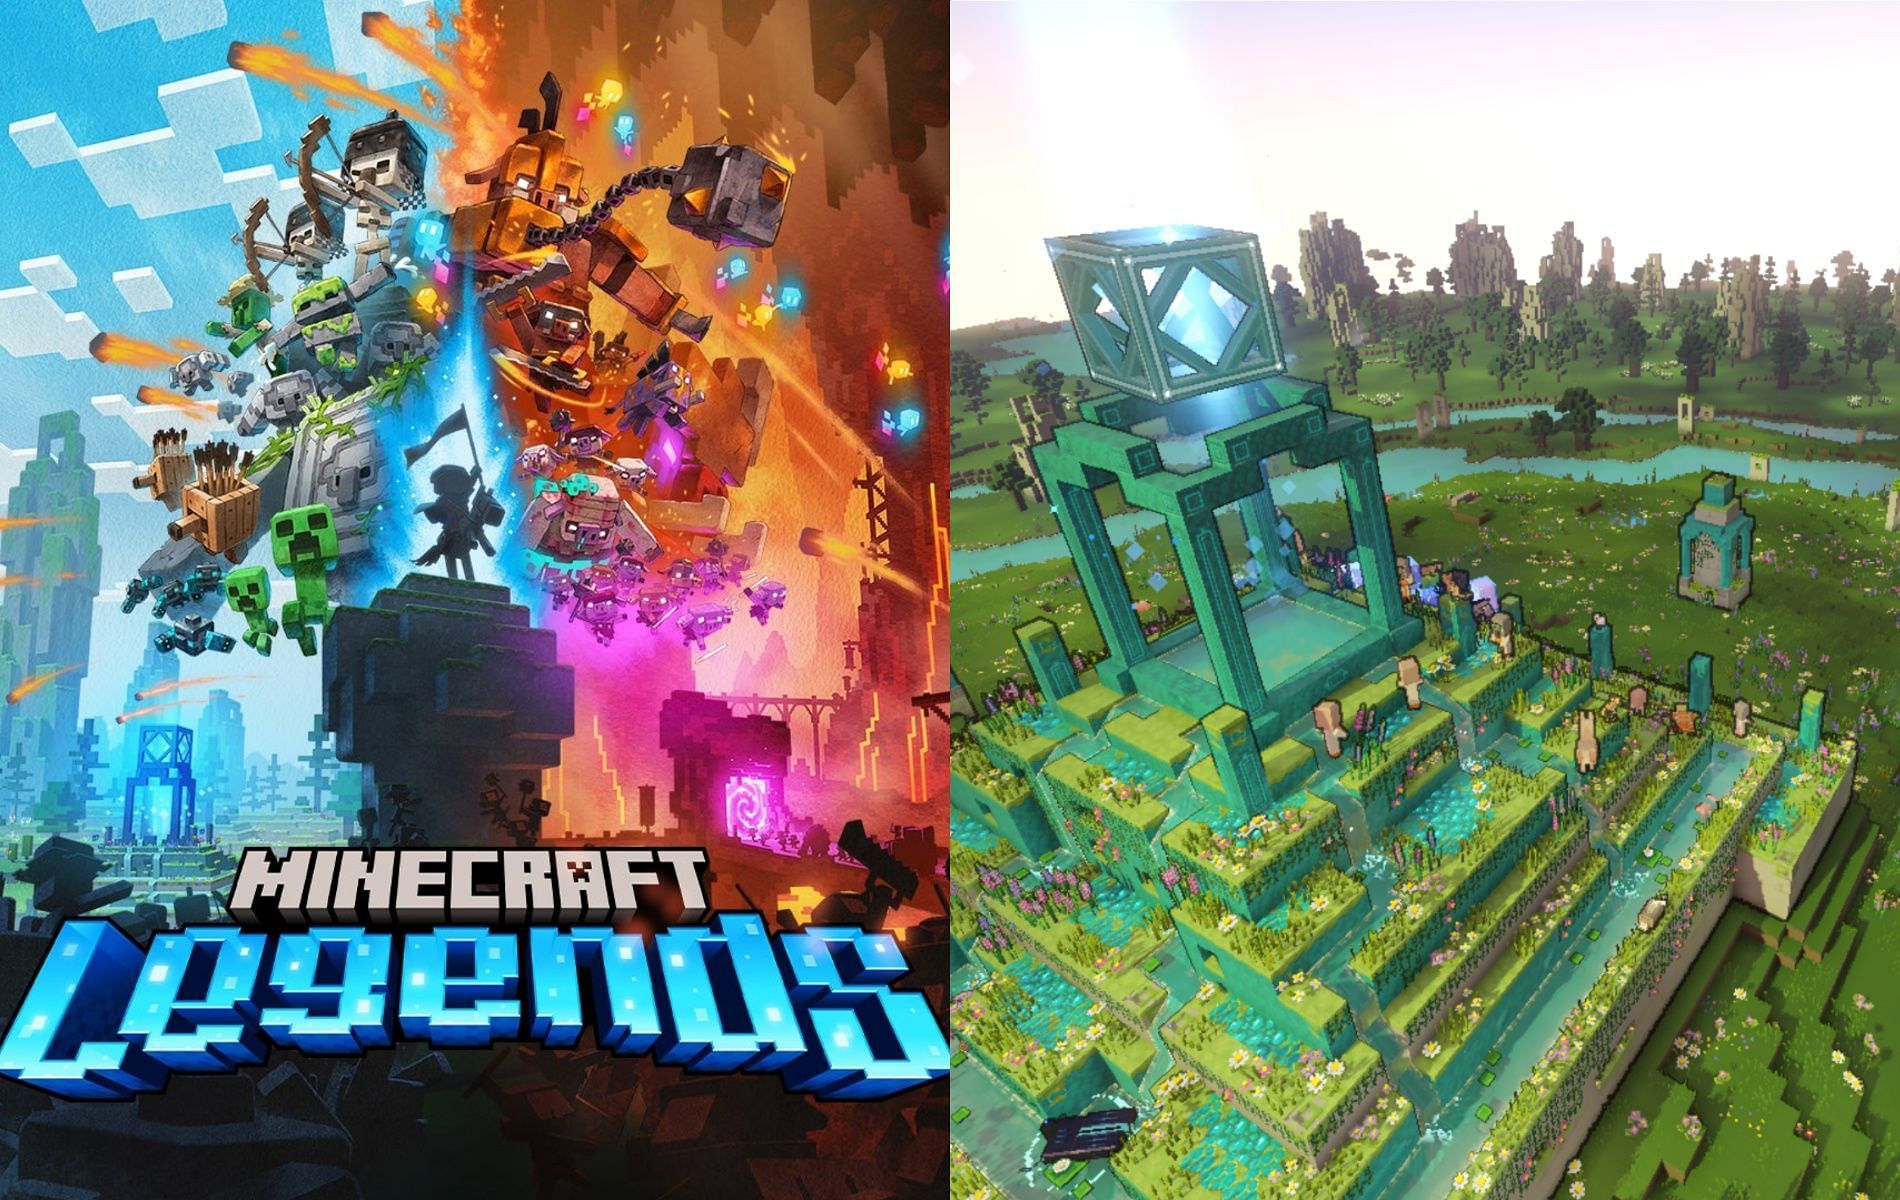 If nothing else, Legends is an unprecedented take on the Minecraft formula that has room for growth (Images via Xbox Game Studios)